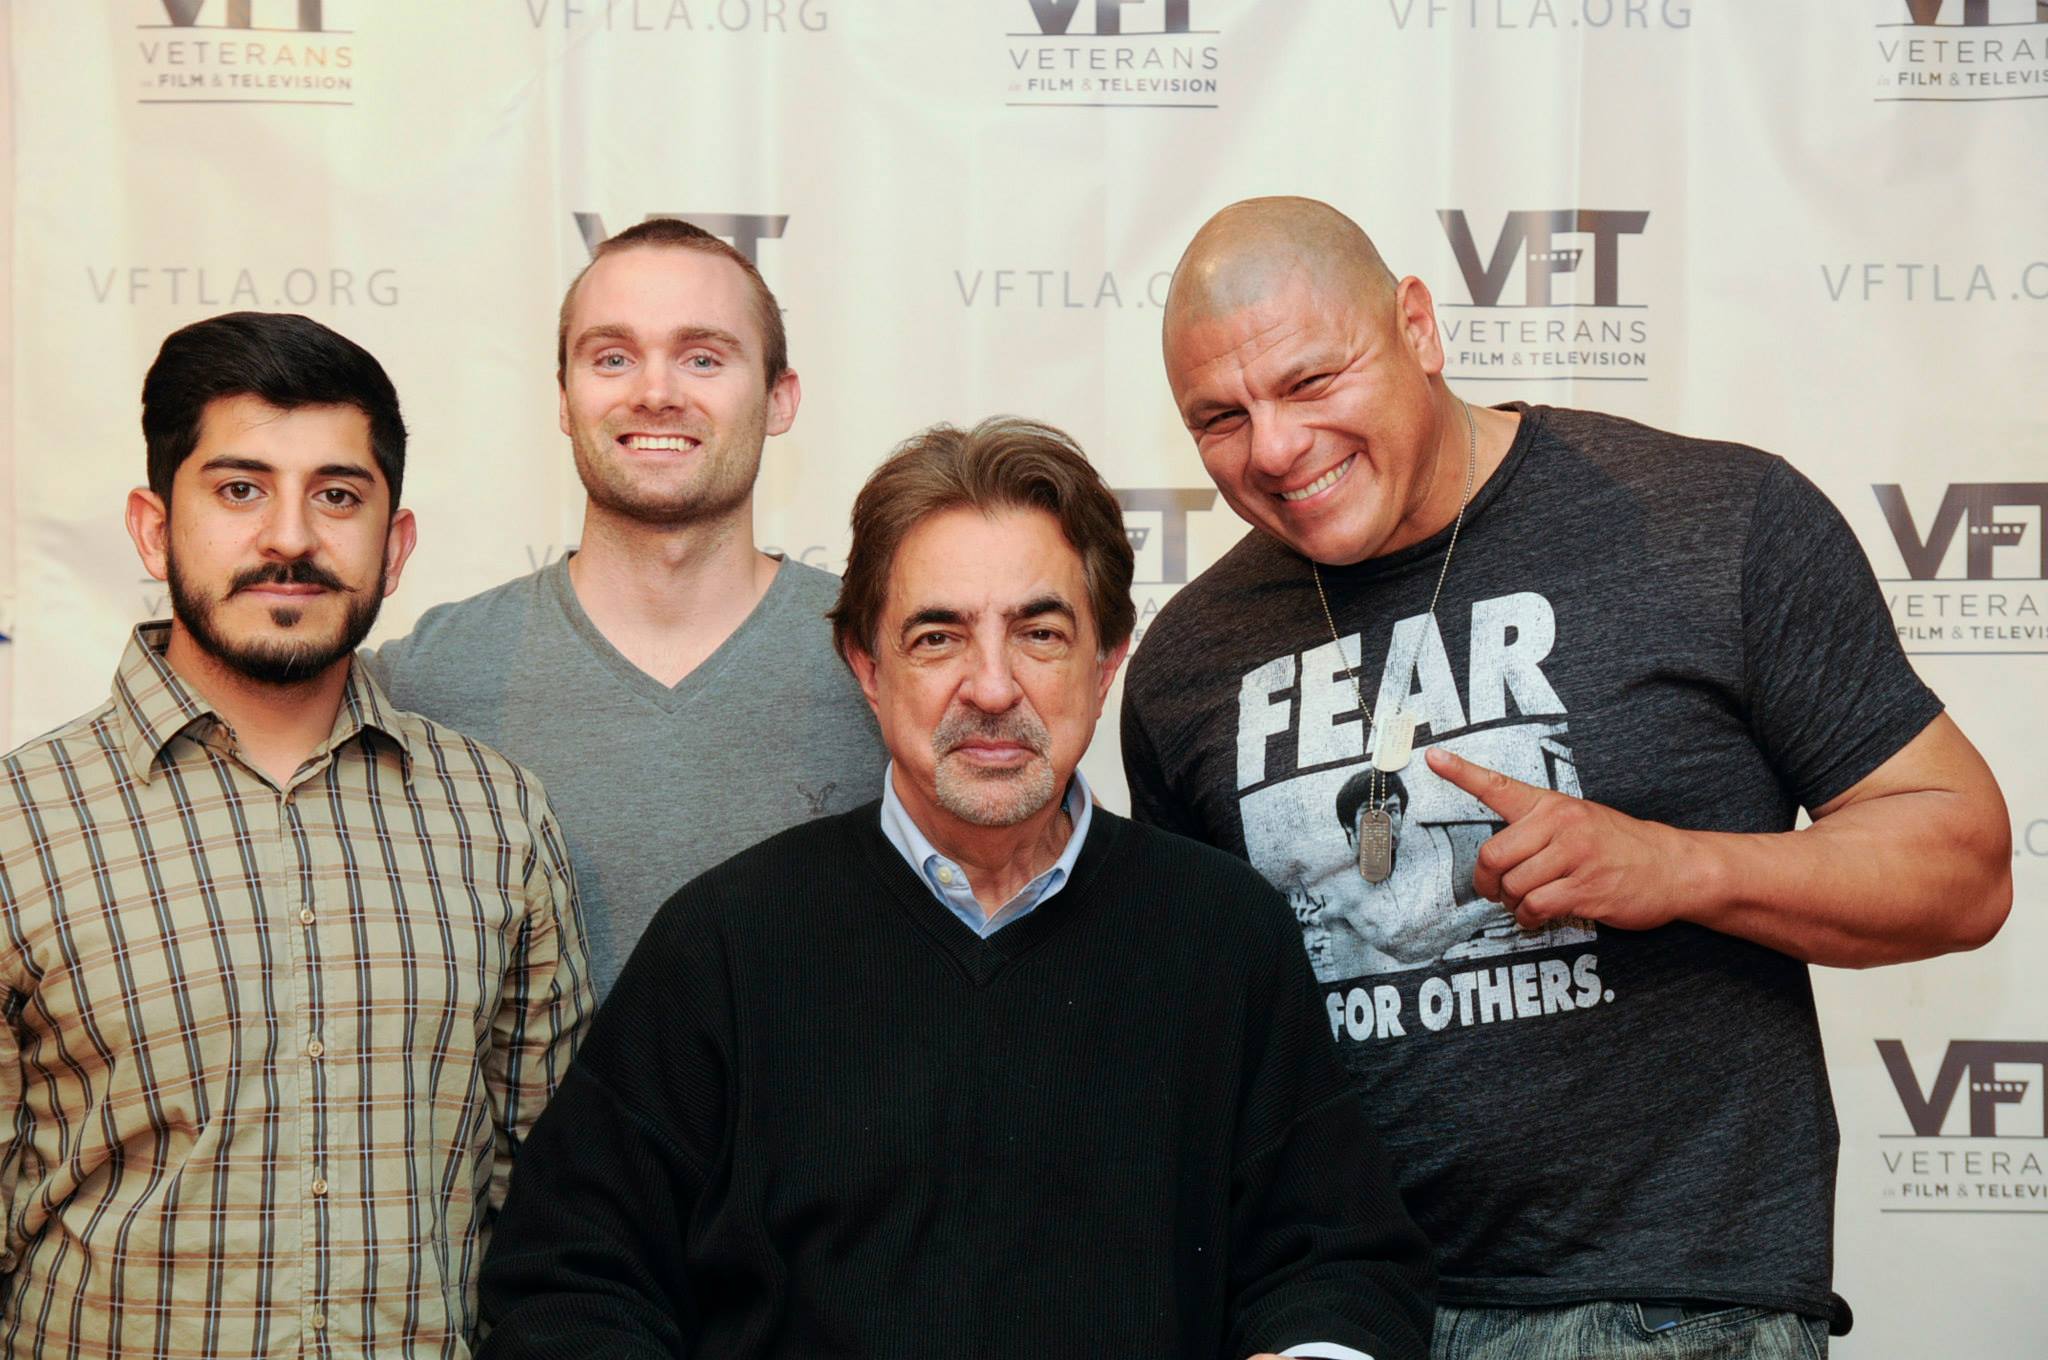 VFT Event at the American Legion Post 43 in Hollywood. -With actor Joe Mantegna